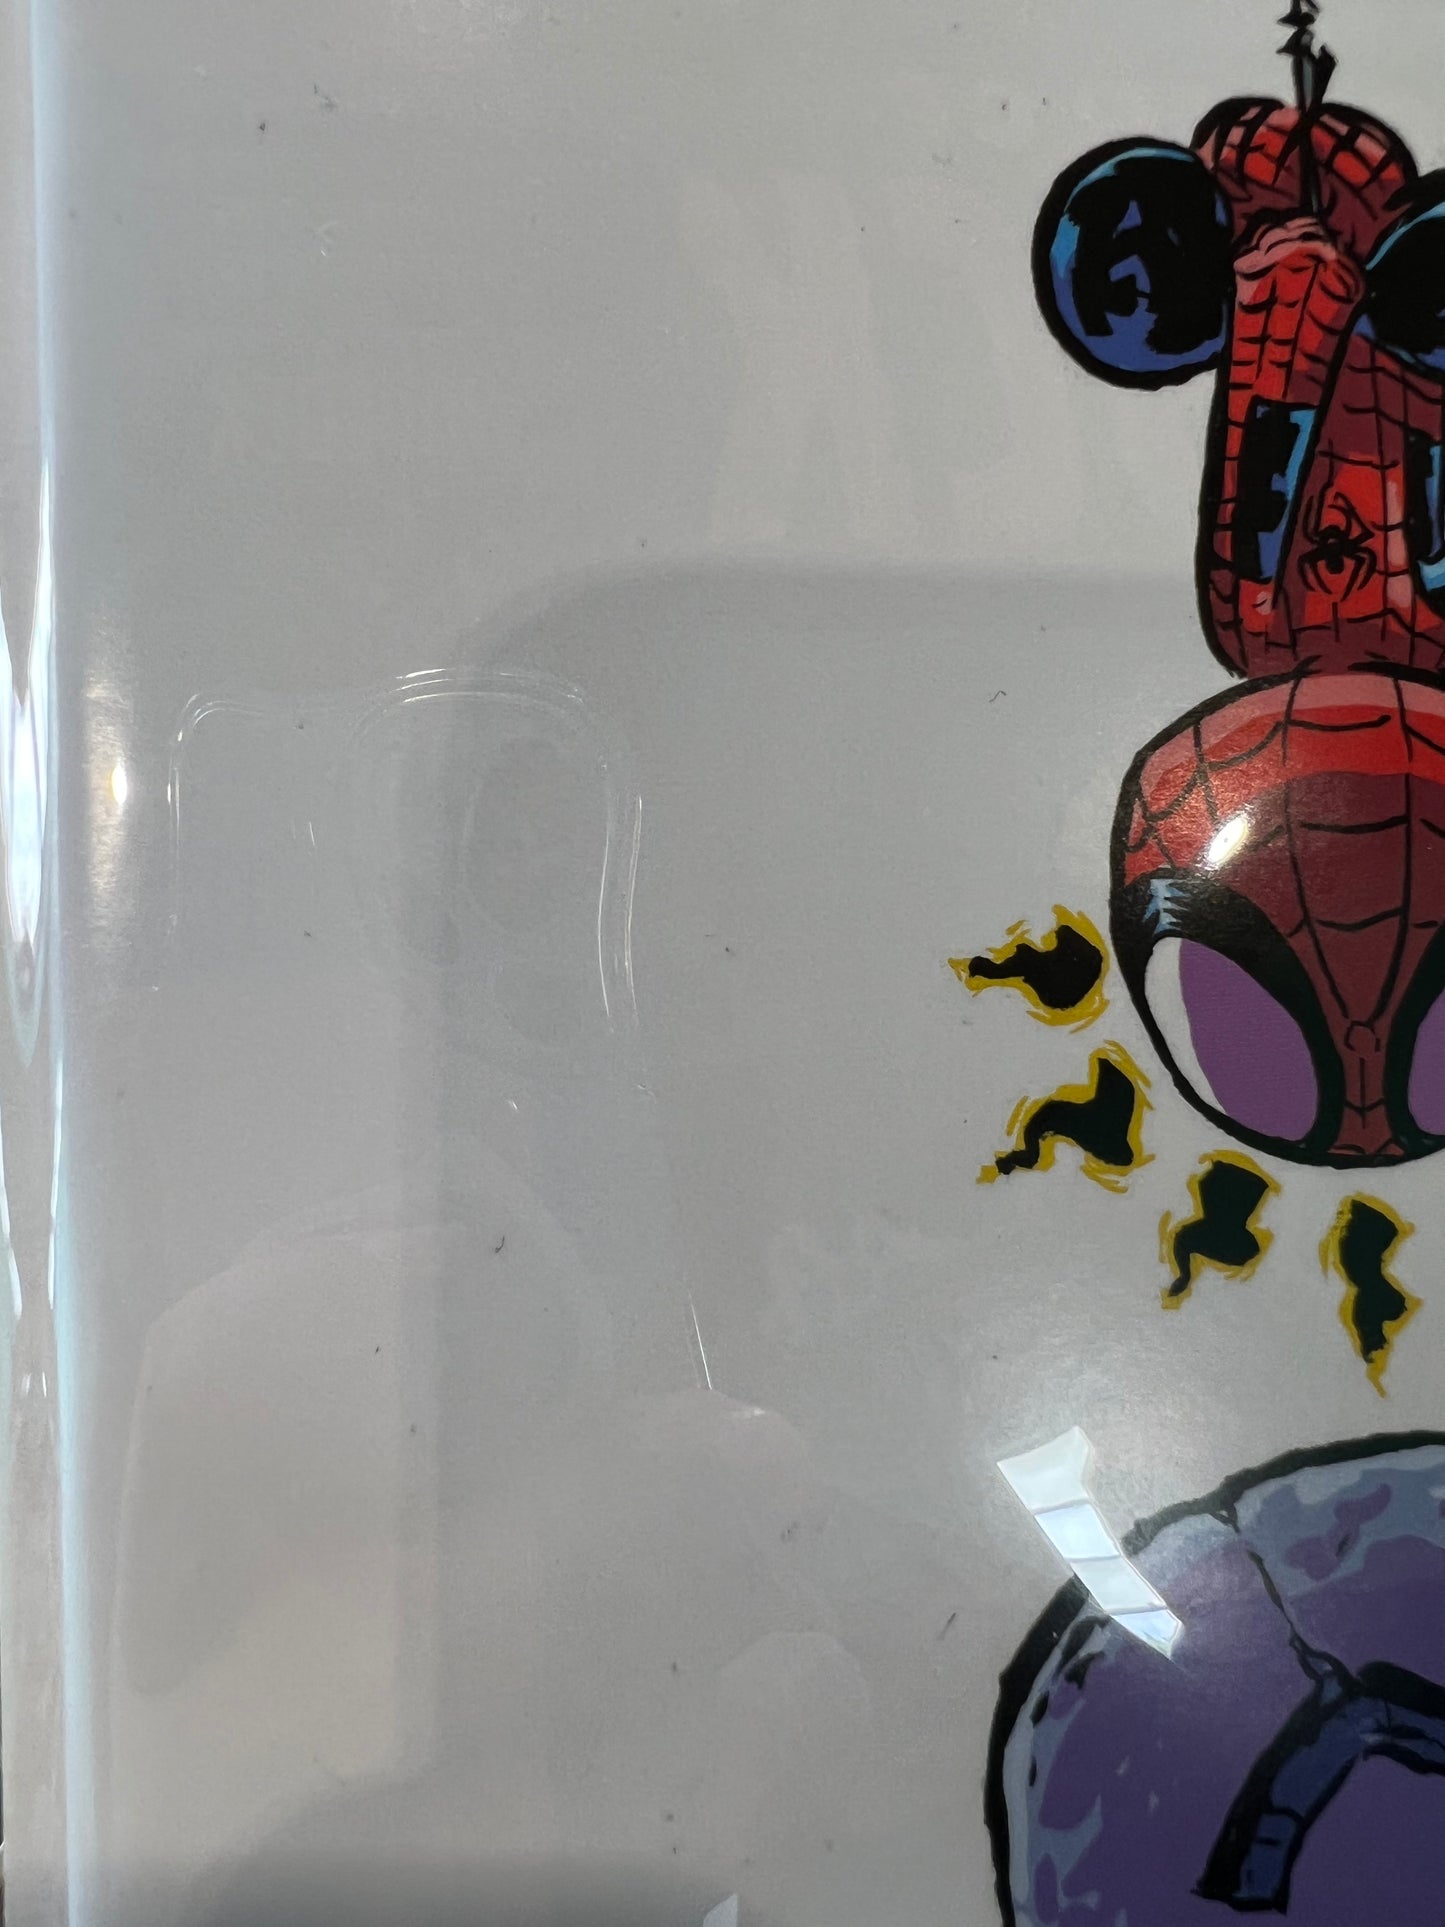 Amazing Spider-Man #26 (2022, 7th Series) Skottie Young Variant Signed by Skottie Young